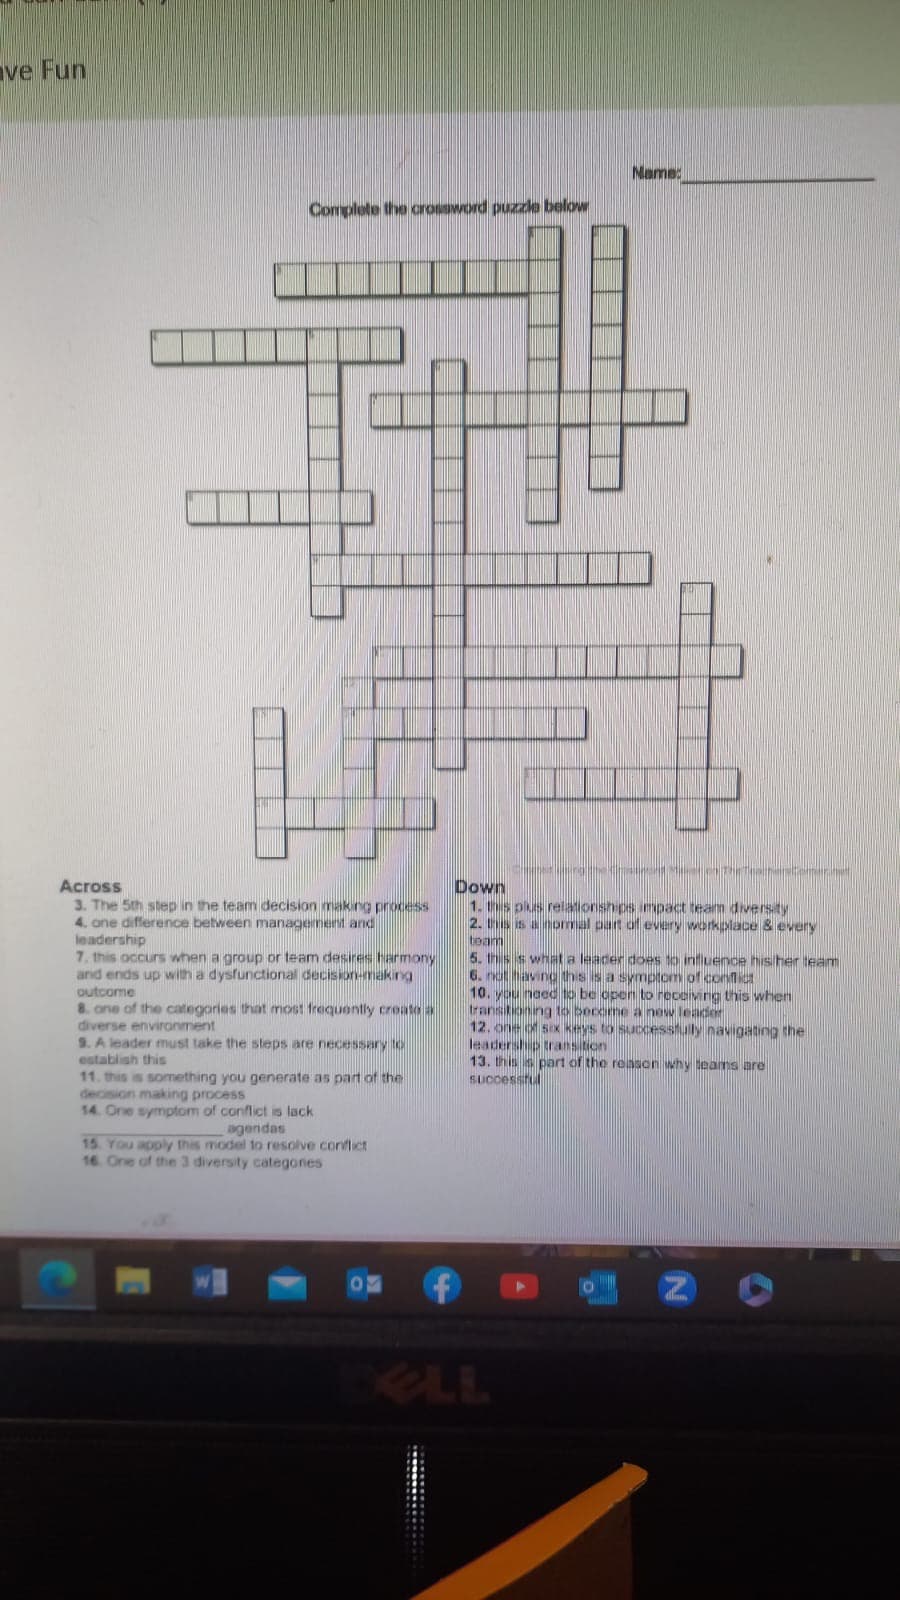 ve Fun
Complete the crossword puzzle below
Across
3. The 5th step in the team decision making process
4. one difference between management and
leadership
7. this occurs when a group or team desires harmony
and ends up with a dysfunctional decision-making
outcome
8. one of the categories that most frequently create a
diverse environment
9. A leader must take the steps are necessary to
establish this
11. this is something you generate as part of the
decision making process
14. One symptom of conflict is lack
agendas
15. You apply this model to resolve conflict
16. One of the 3 diversity categories.
inge
Name:
MTAND
Down
1. this plius relationships impact team diversity
2. is a normal part of every workplace & every
team
5. this is what a leader does to influence his her team
6. not having this is a symptom of conflict
10. you need to be open to receiving this when
transitioning to become a new leader
12. one of six keys to successfully navigating the
leadership transition
13. this part of the reason why teams are
successfu